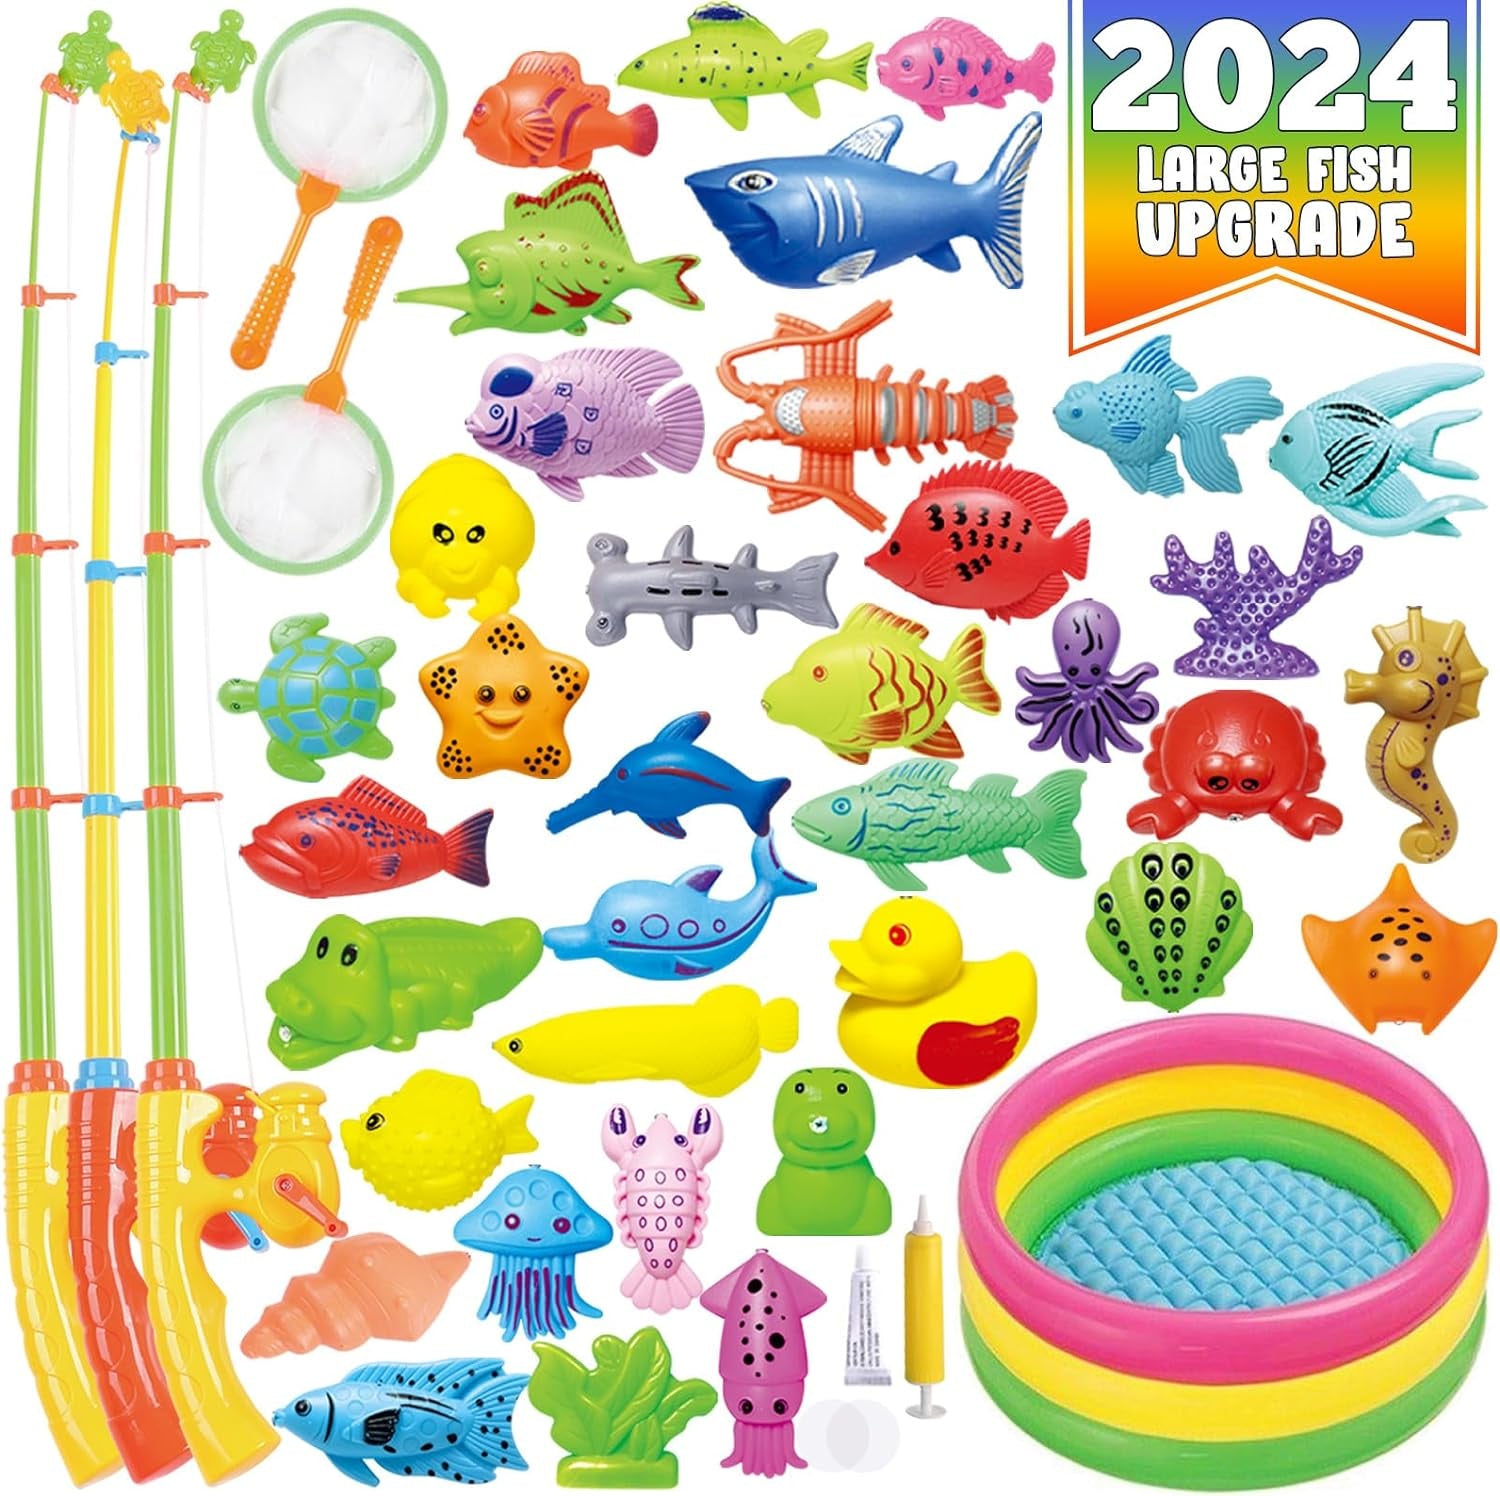 Cozybomb™ Magnetic Fishing Toys Game Set for Kids | Water Table Bathtub Kiddie Pool Party with Pole Rod Net, Plastic Floating Fish-Toddler Color Ocean Sea Animals Age 3 4 5 6 Year Fishingtoy